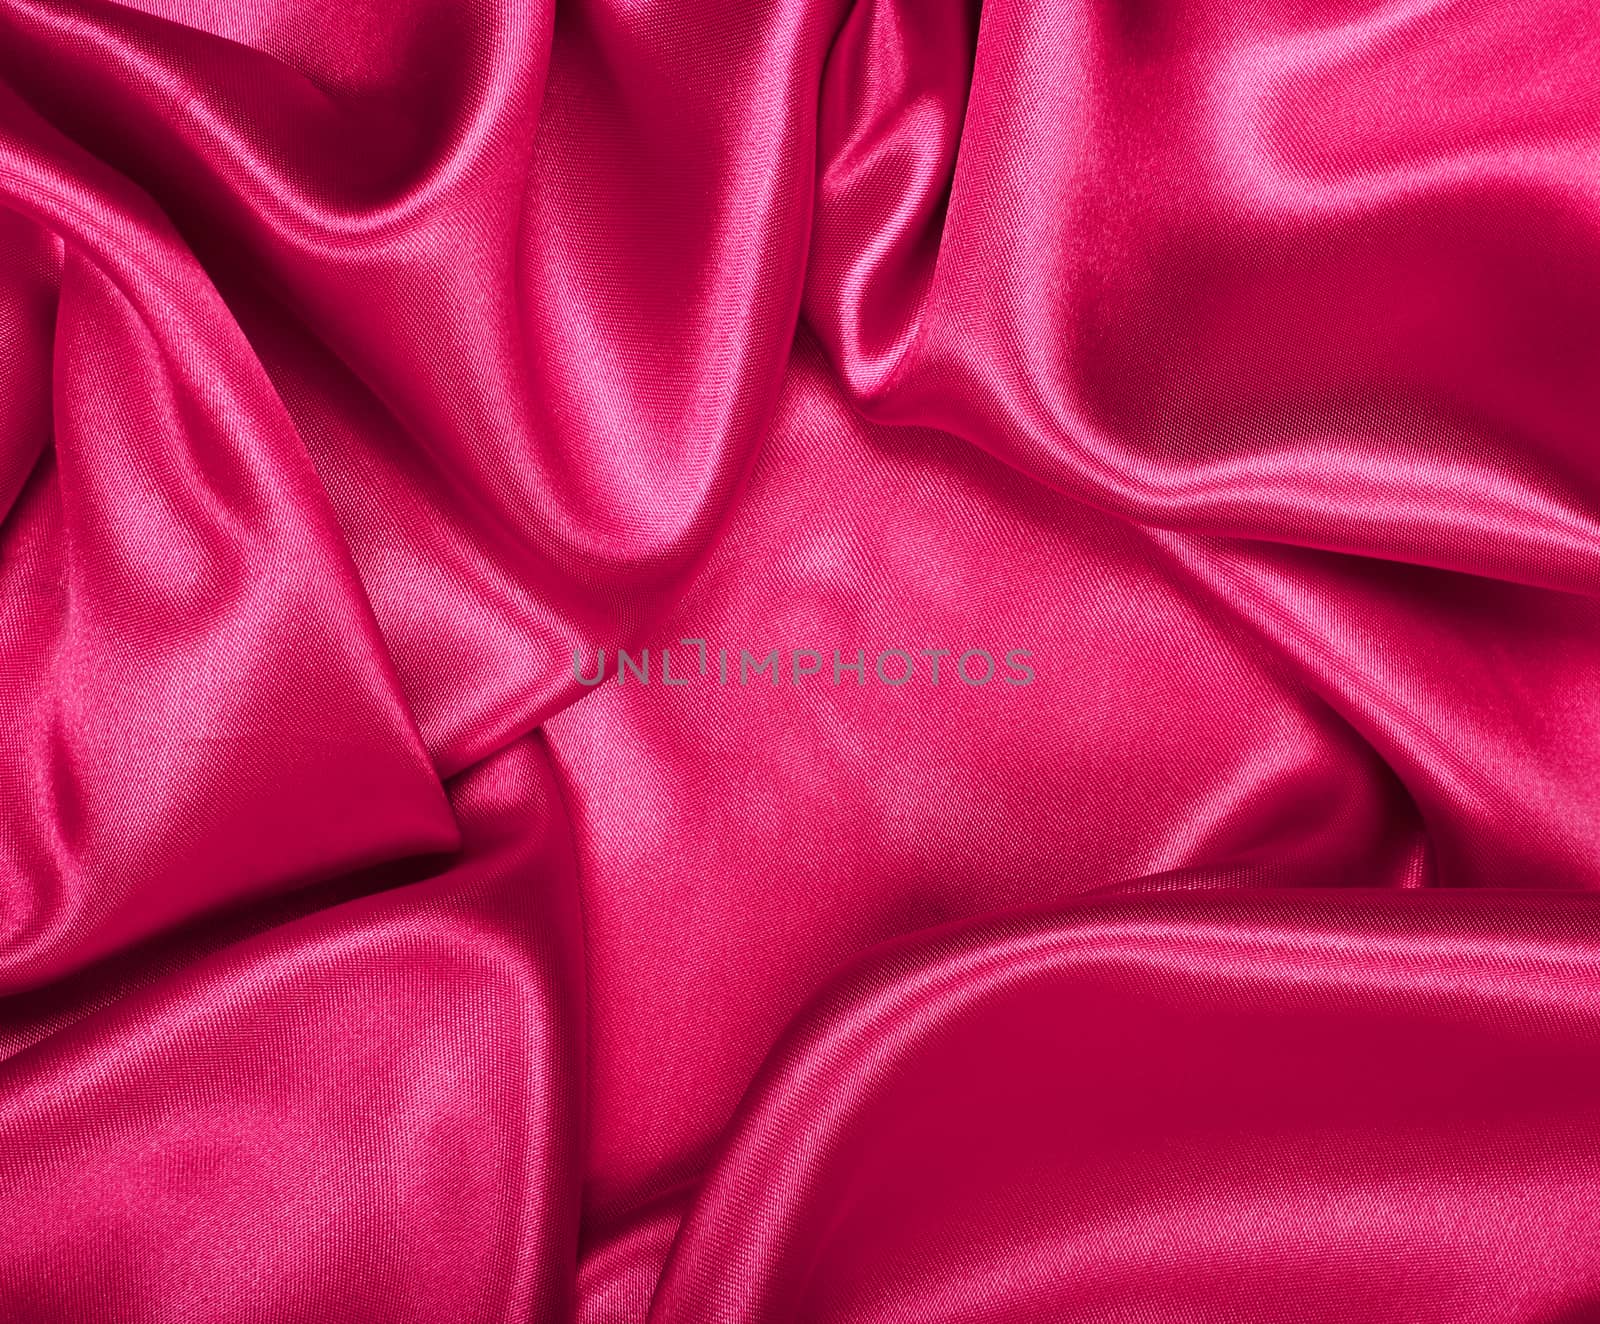 Smooth elegant pink silk or satin texture as background by oxanatravel